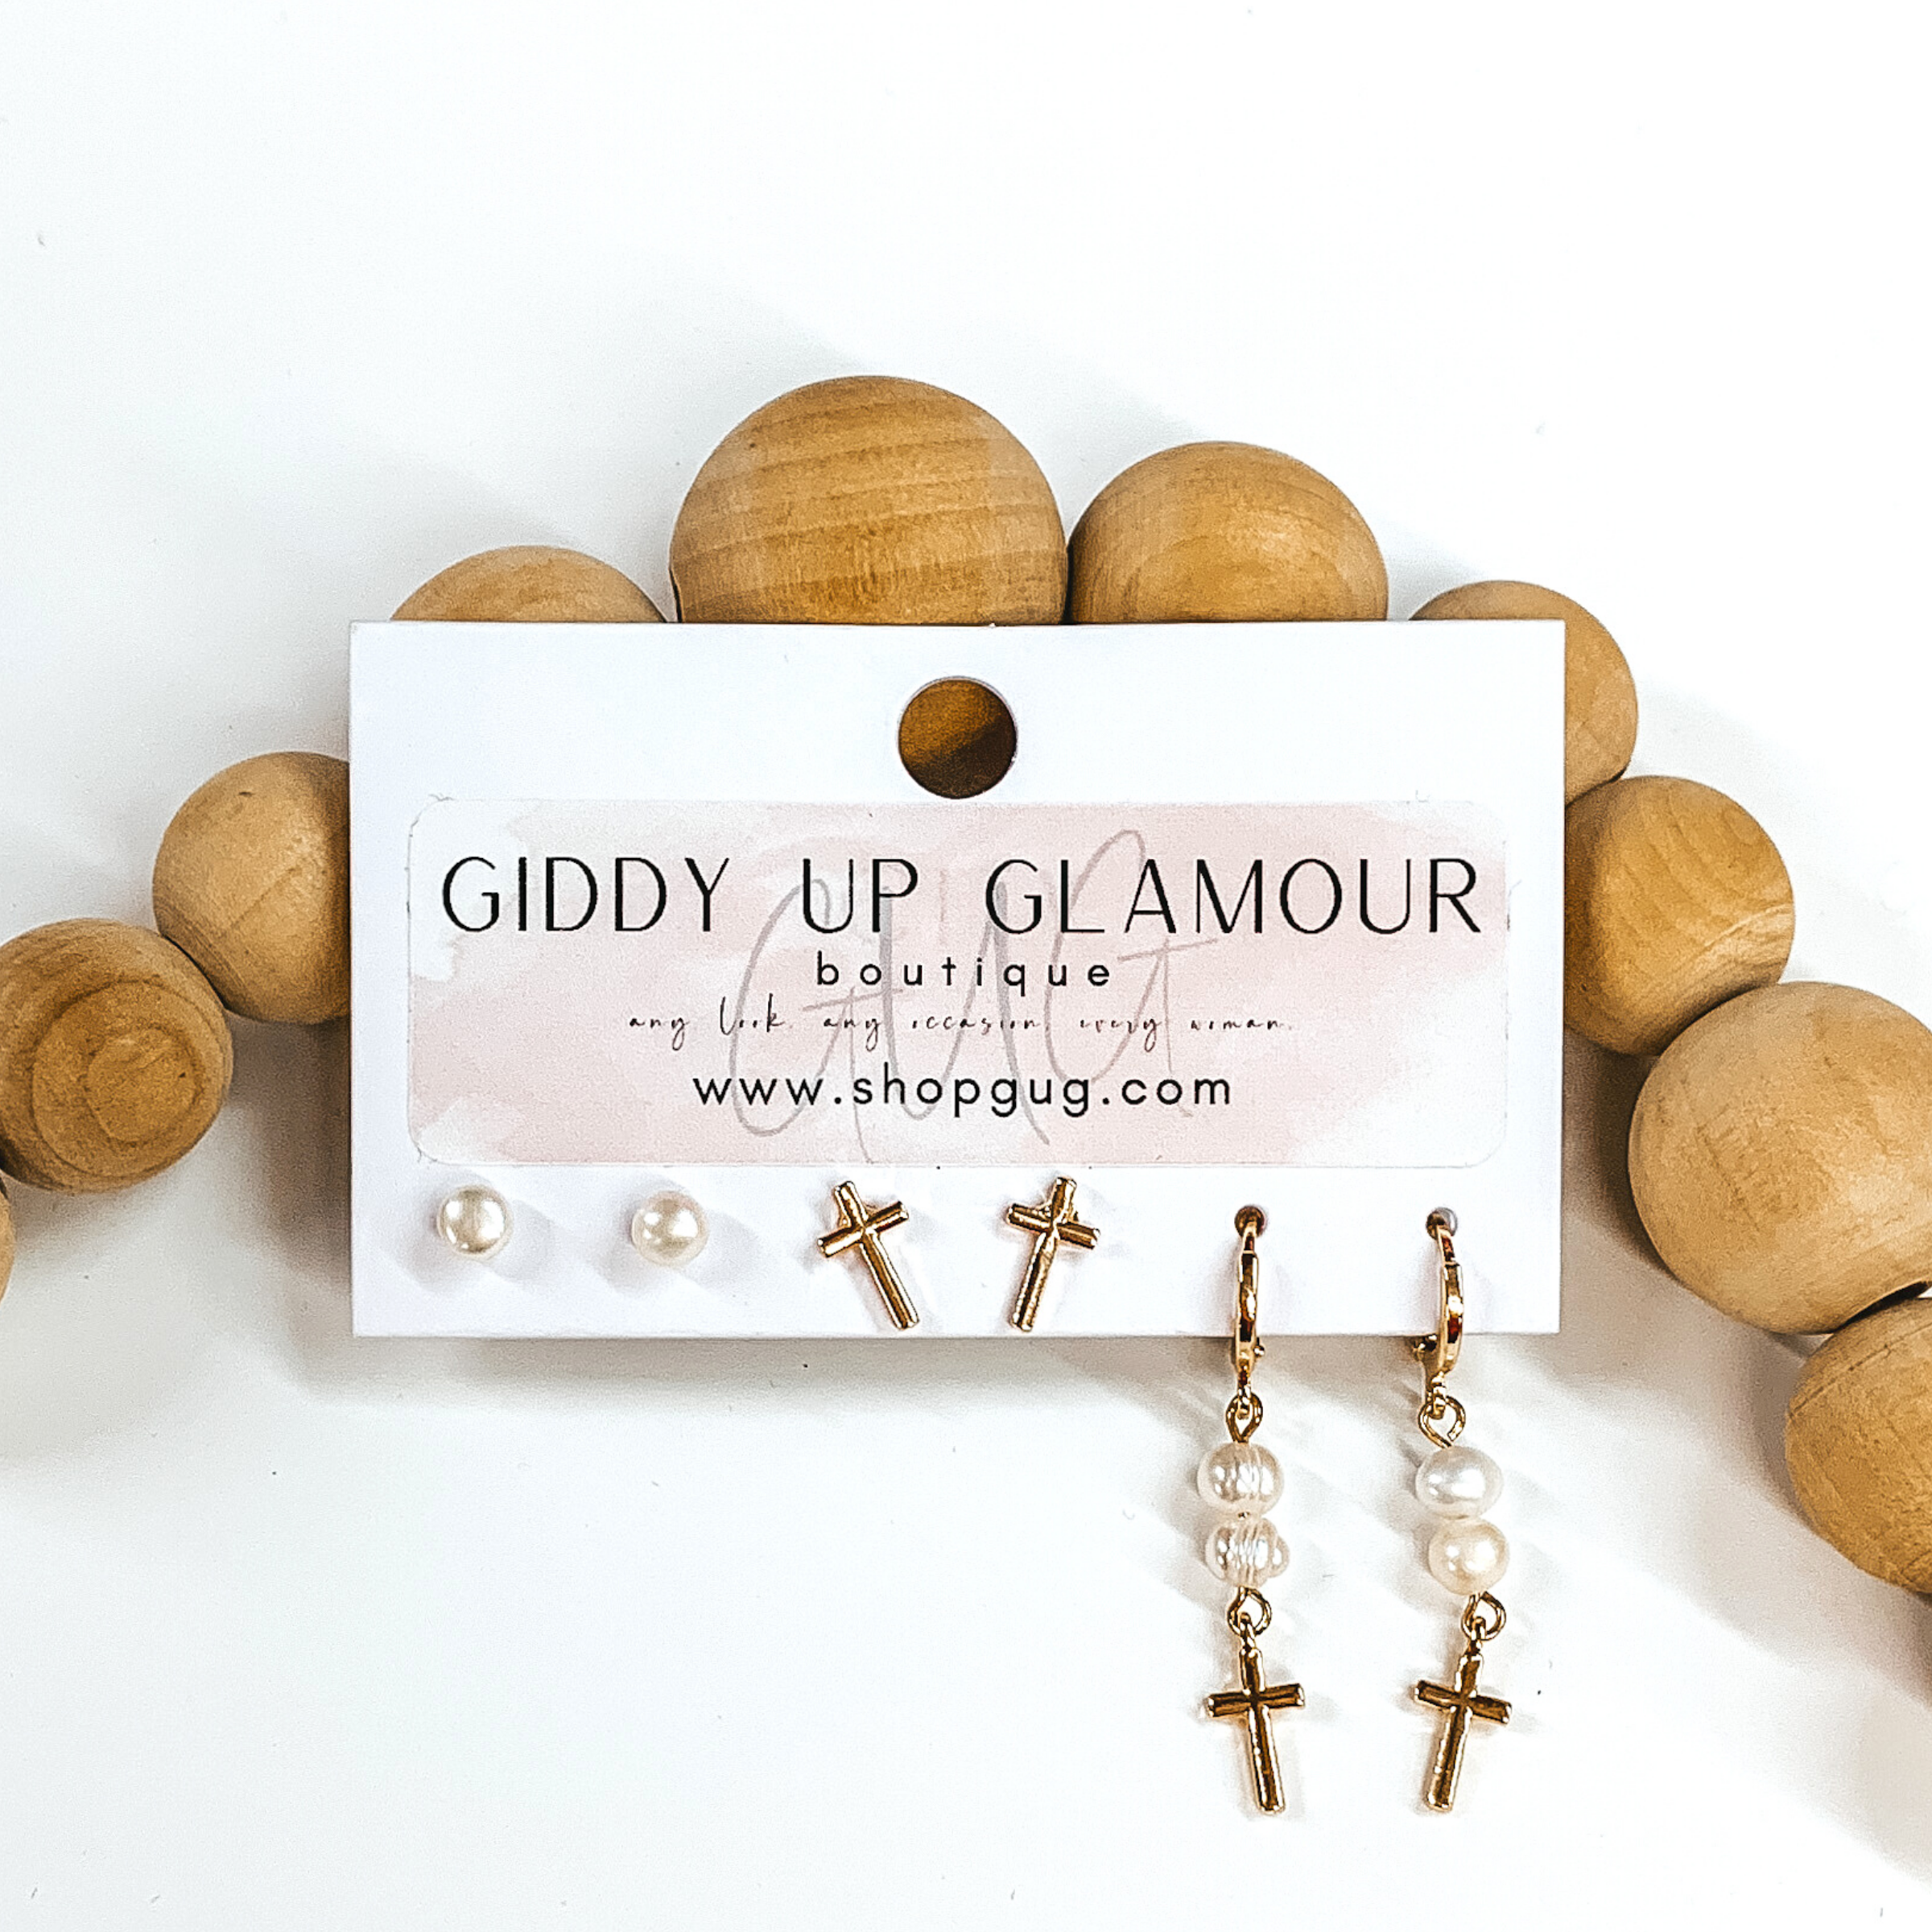 This is a 3 piece gold and pearl earring set. There is a pair of white pearl studs, a gold pair of silver studs, and a pair of dangle pearls with hanging cross pendant. These earrings are pictured on a Giddy Up Glamour earring holder laying in front of tan beads on a white background.  